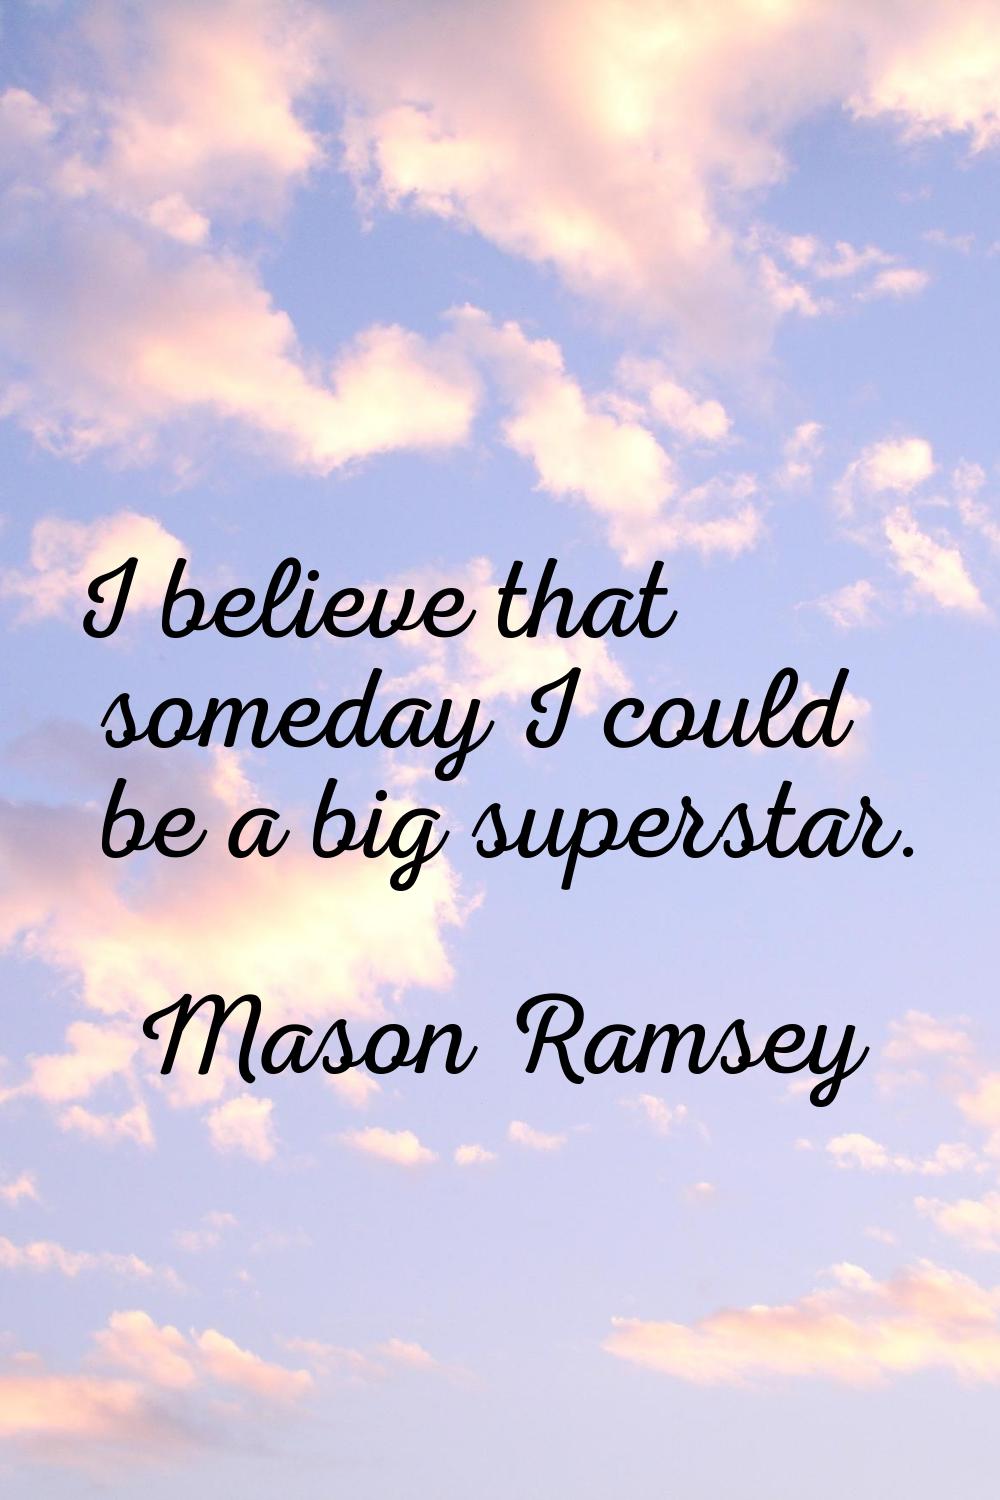 I believe that someday I could be a big superstar.